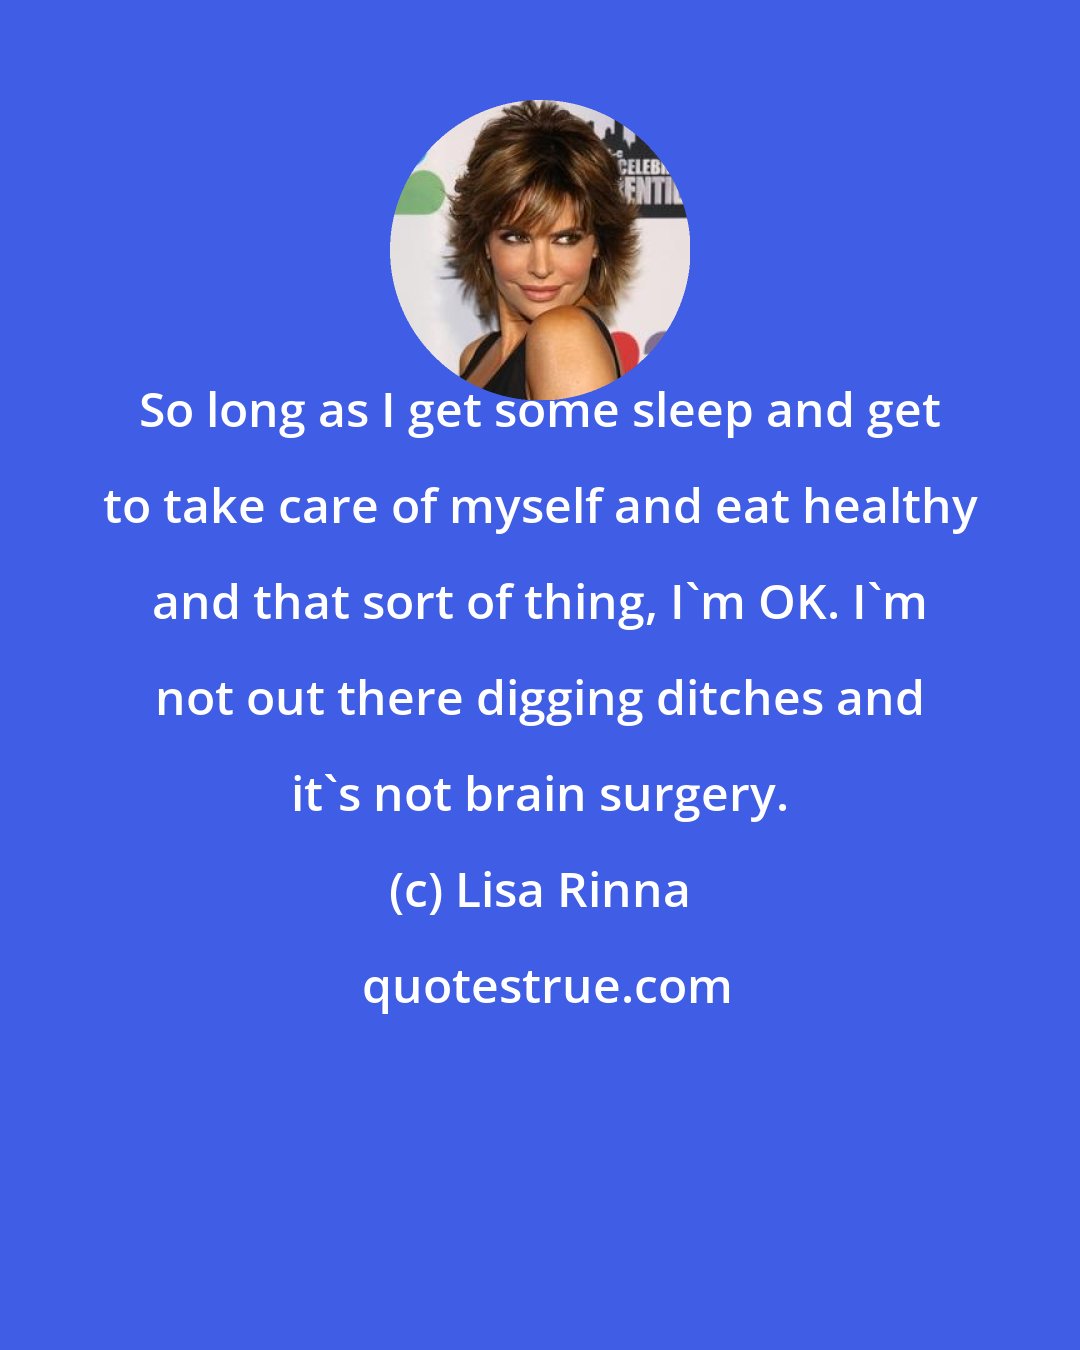 Lisa Rinna: So long as I get some sleep and get to take care of myself and eat healthy and that sort of thing, I'm OK. I'm not out there digging ditches and it's not brain surgery.